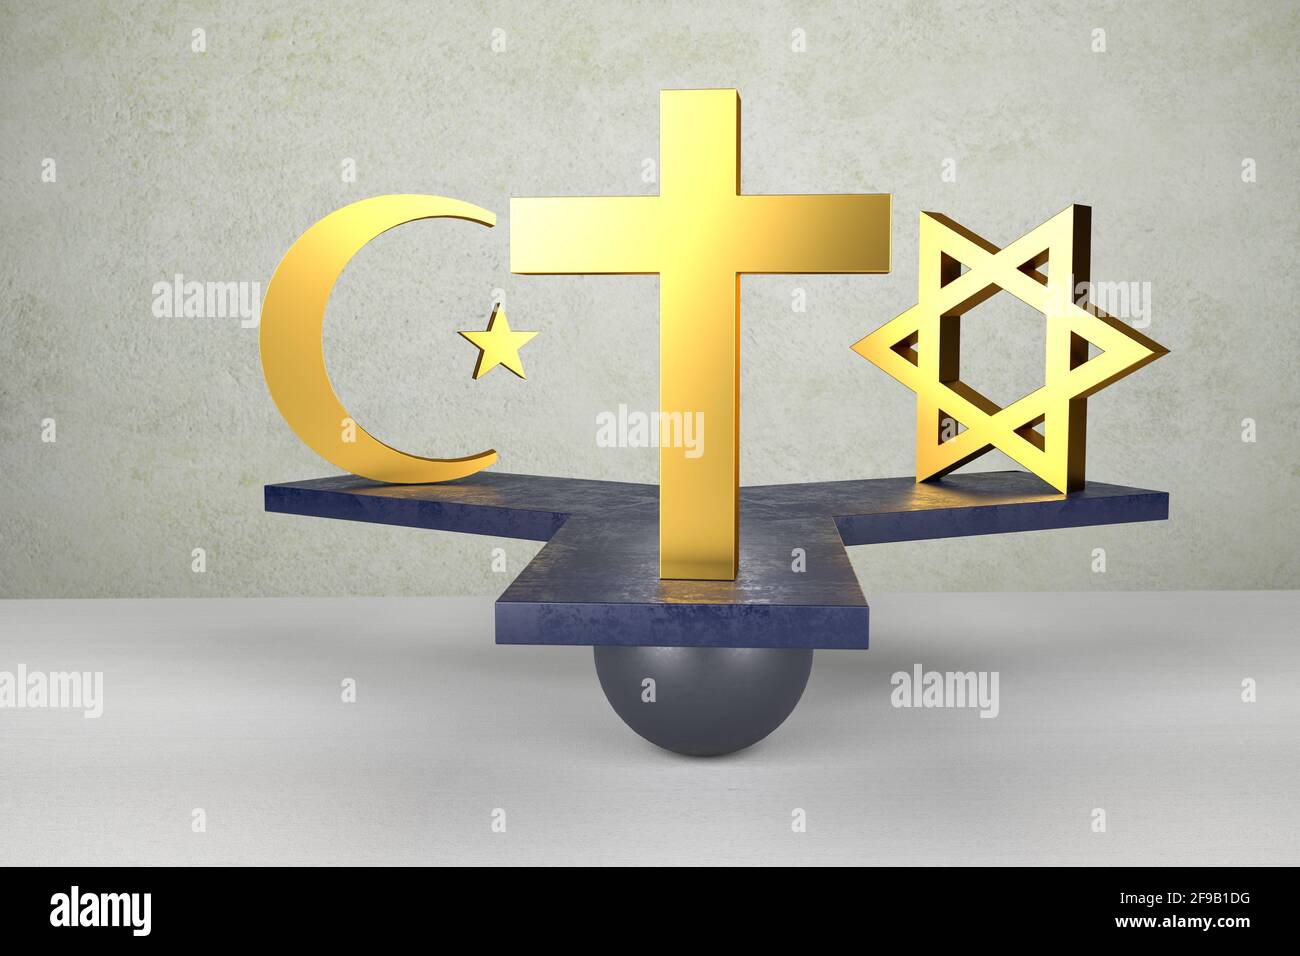 Equal rights concept: Equality of religions. An islamic star and crescent, a christian cross and a jewish star of david on a threeway seesaw on a sphe Stock Photo